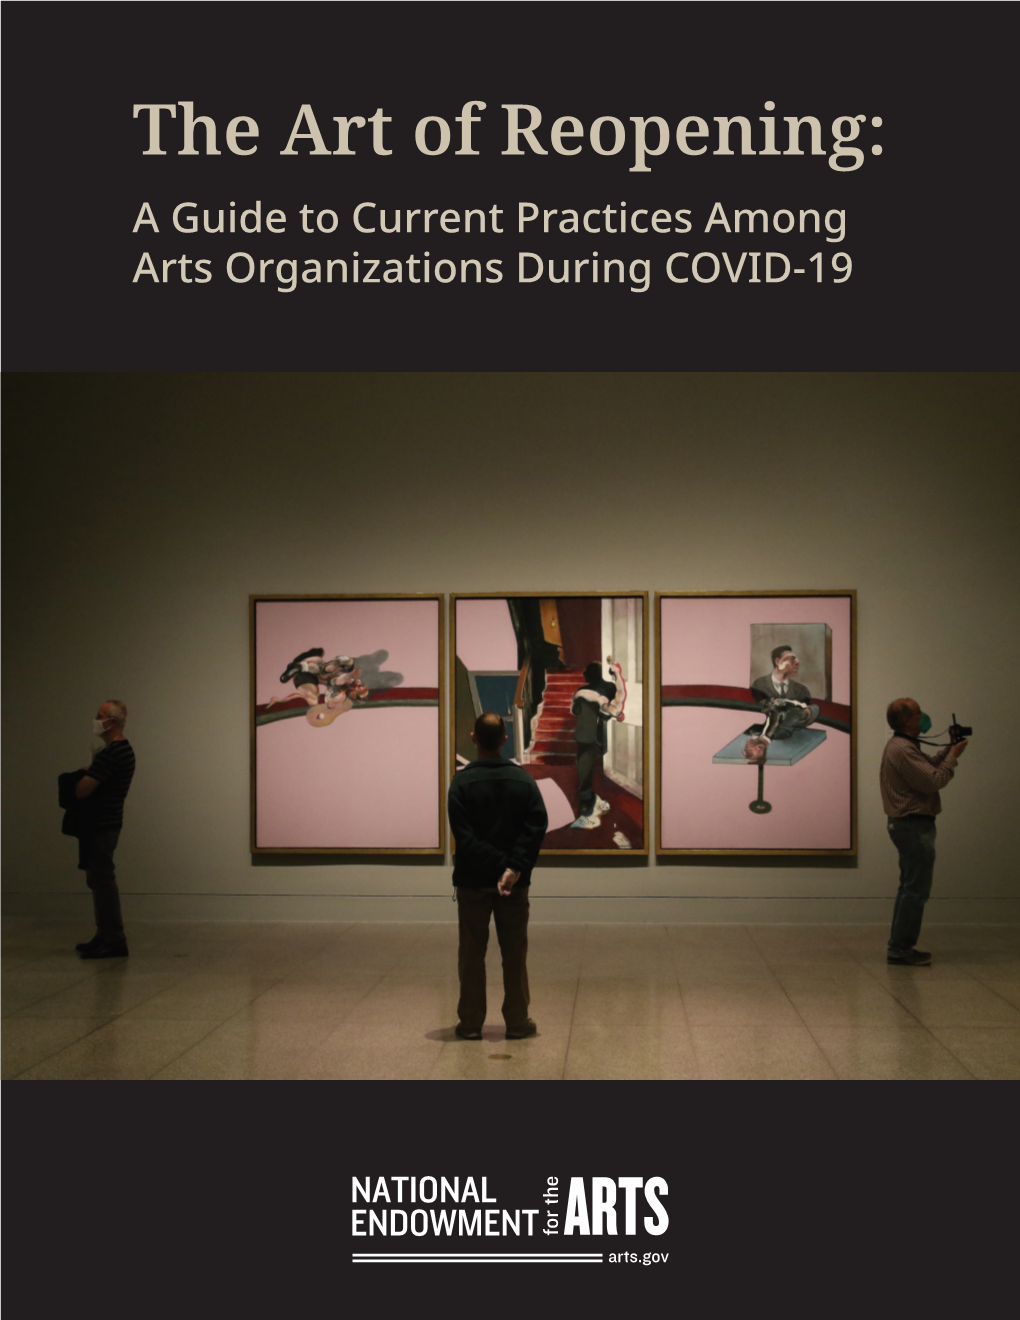 The Art of Reopening: a Guide to Current Practices Among Arts Organizations During COVID-19